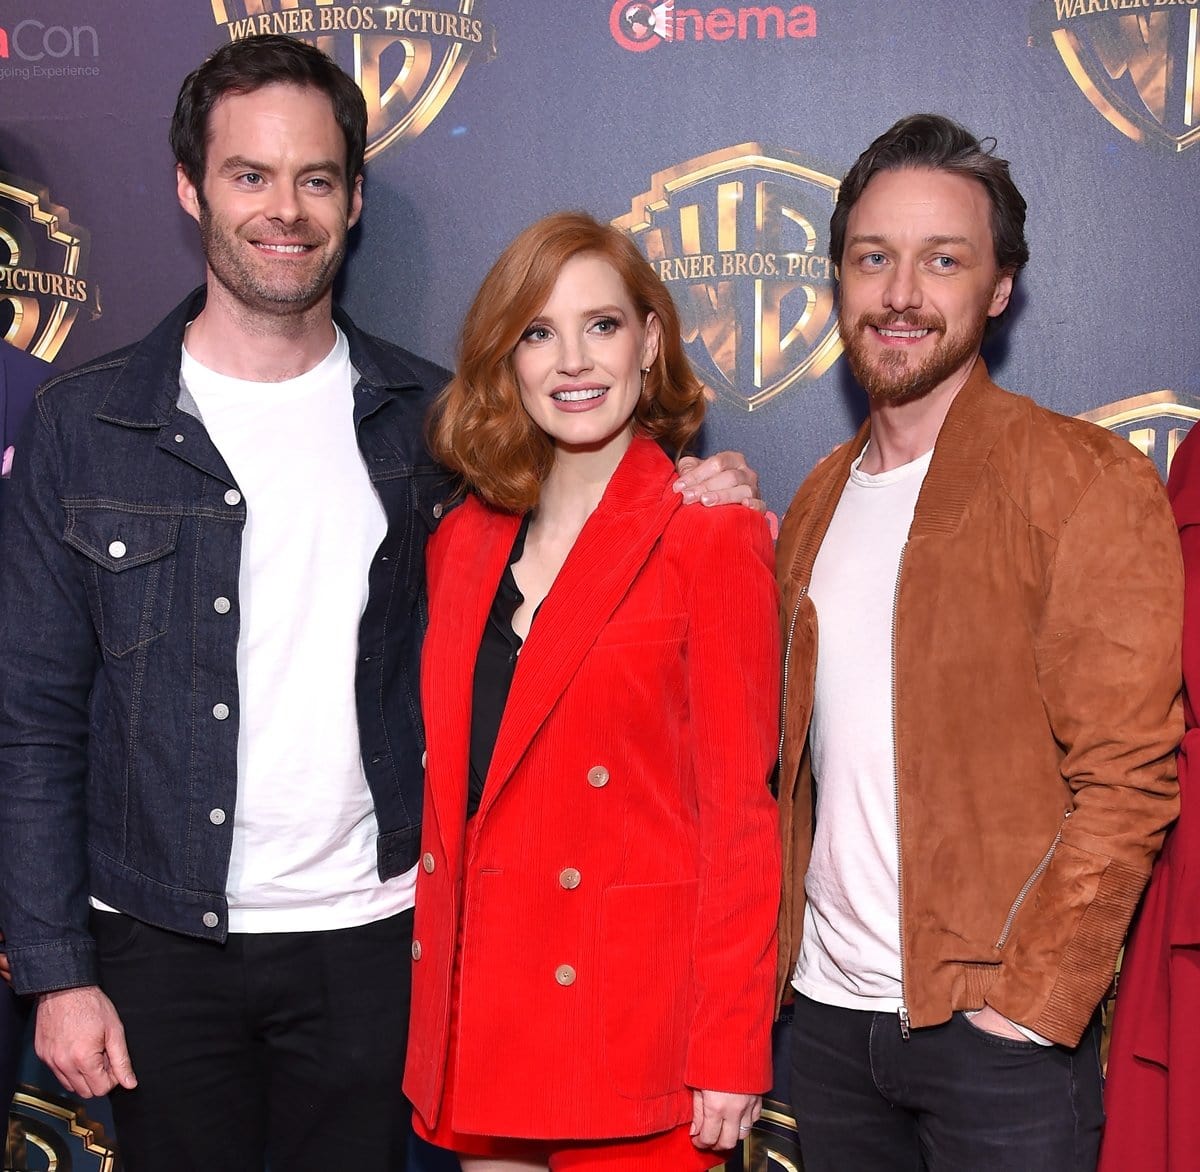 Bill Hader, Jessica Chastain, and James McAvoy attend Warner Bros. Pictures' "The Big Picture" exclusive presentation during CinemaCon